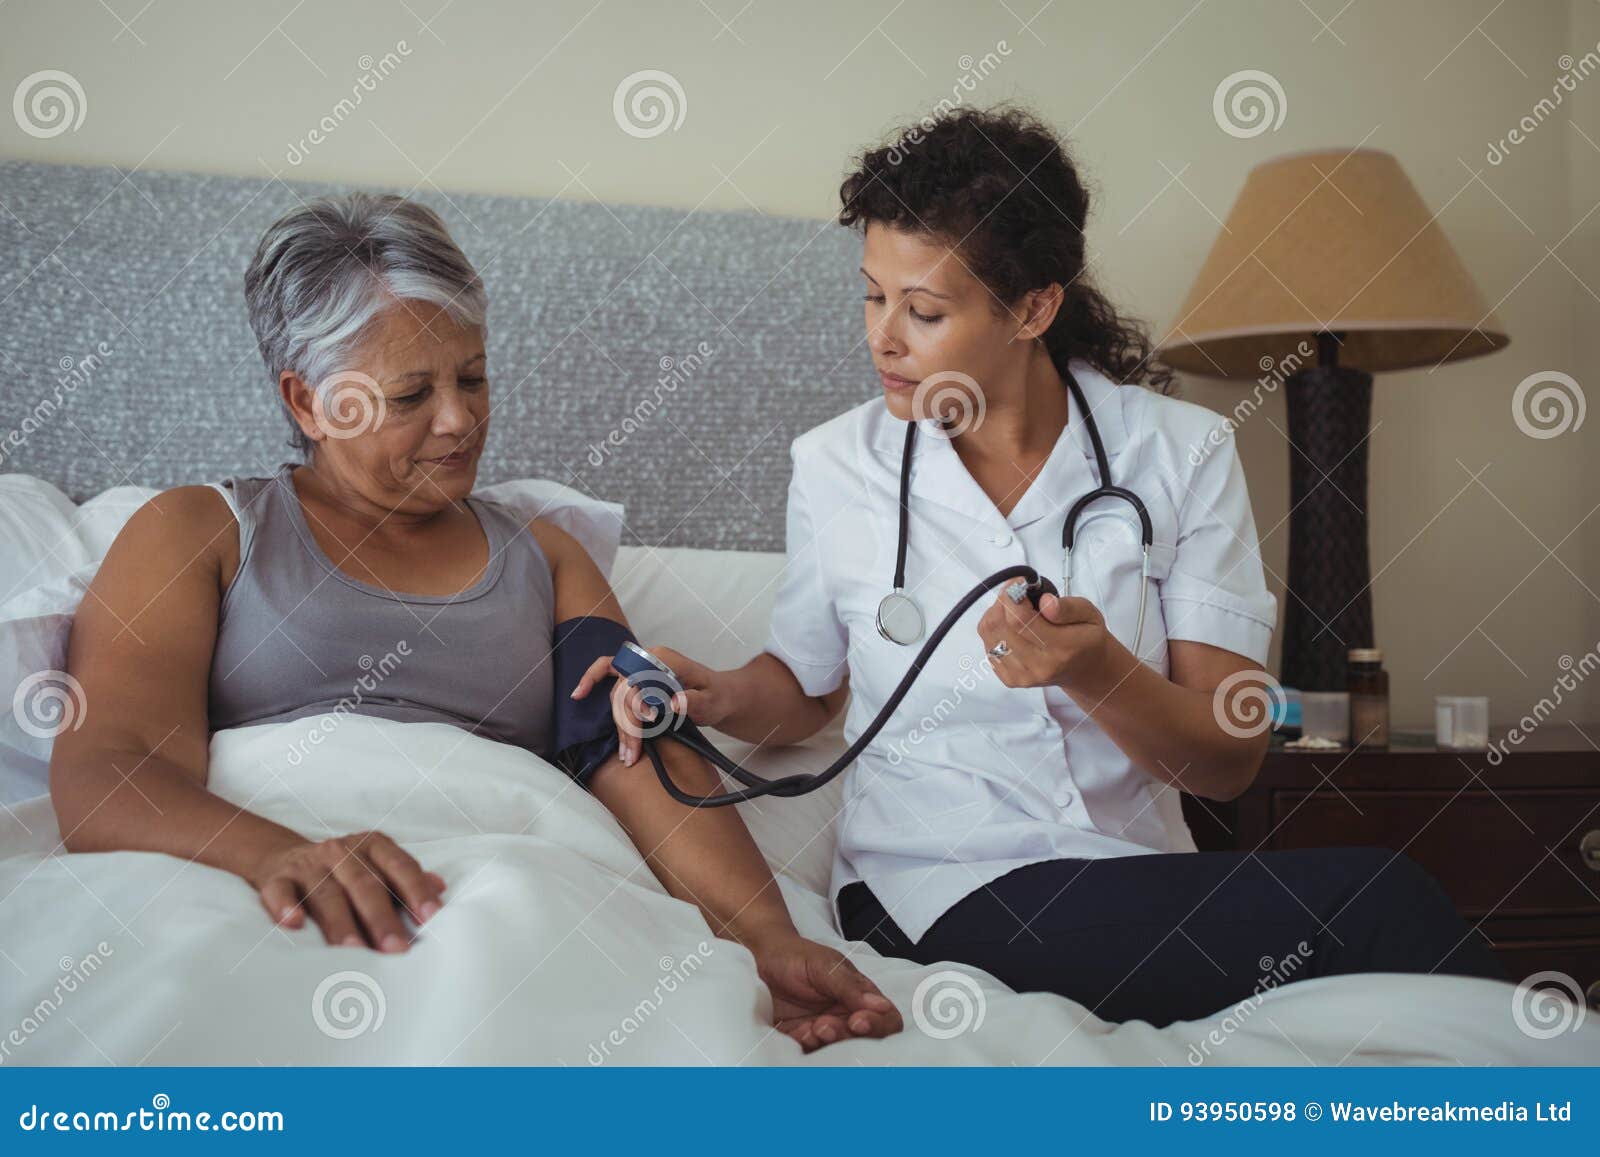 Doctor Measuring Pressure Of The Pregnant Woman. Doctor 